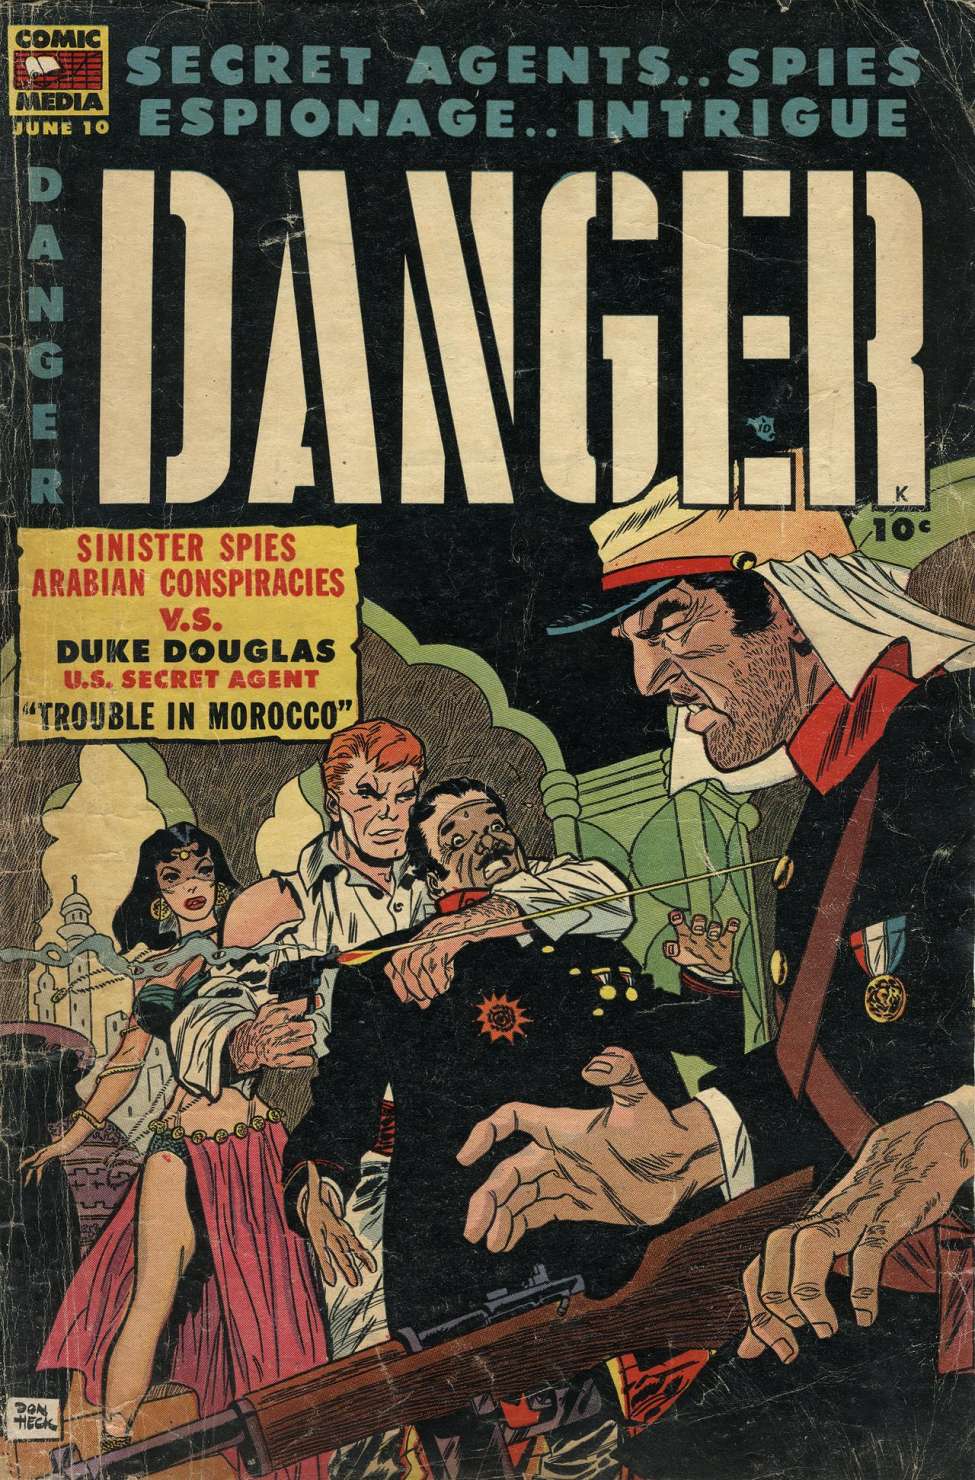 Comic Book Cover For Danger 10